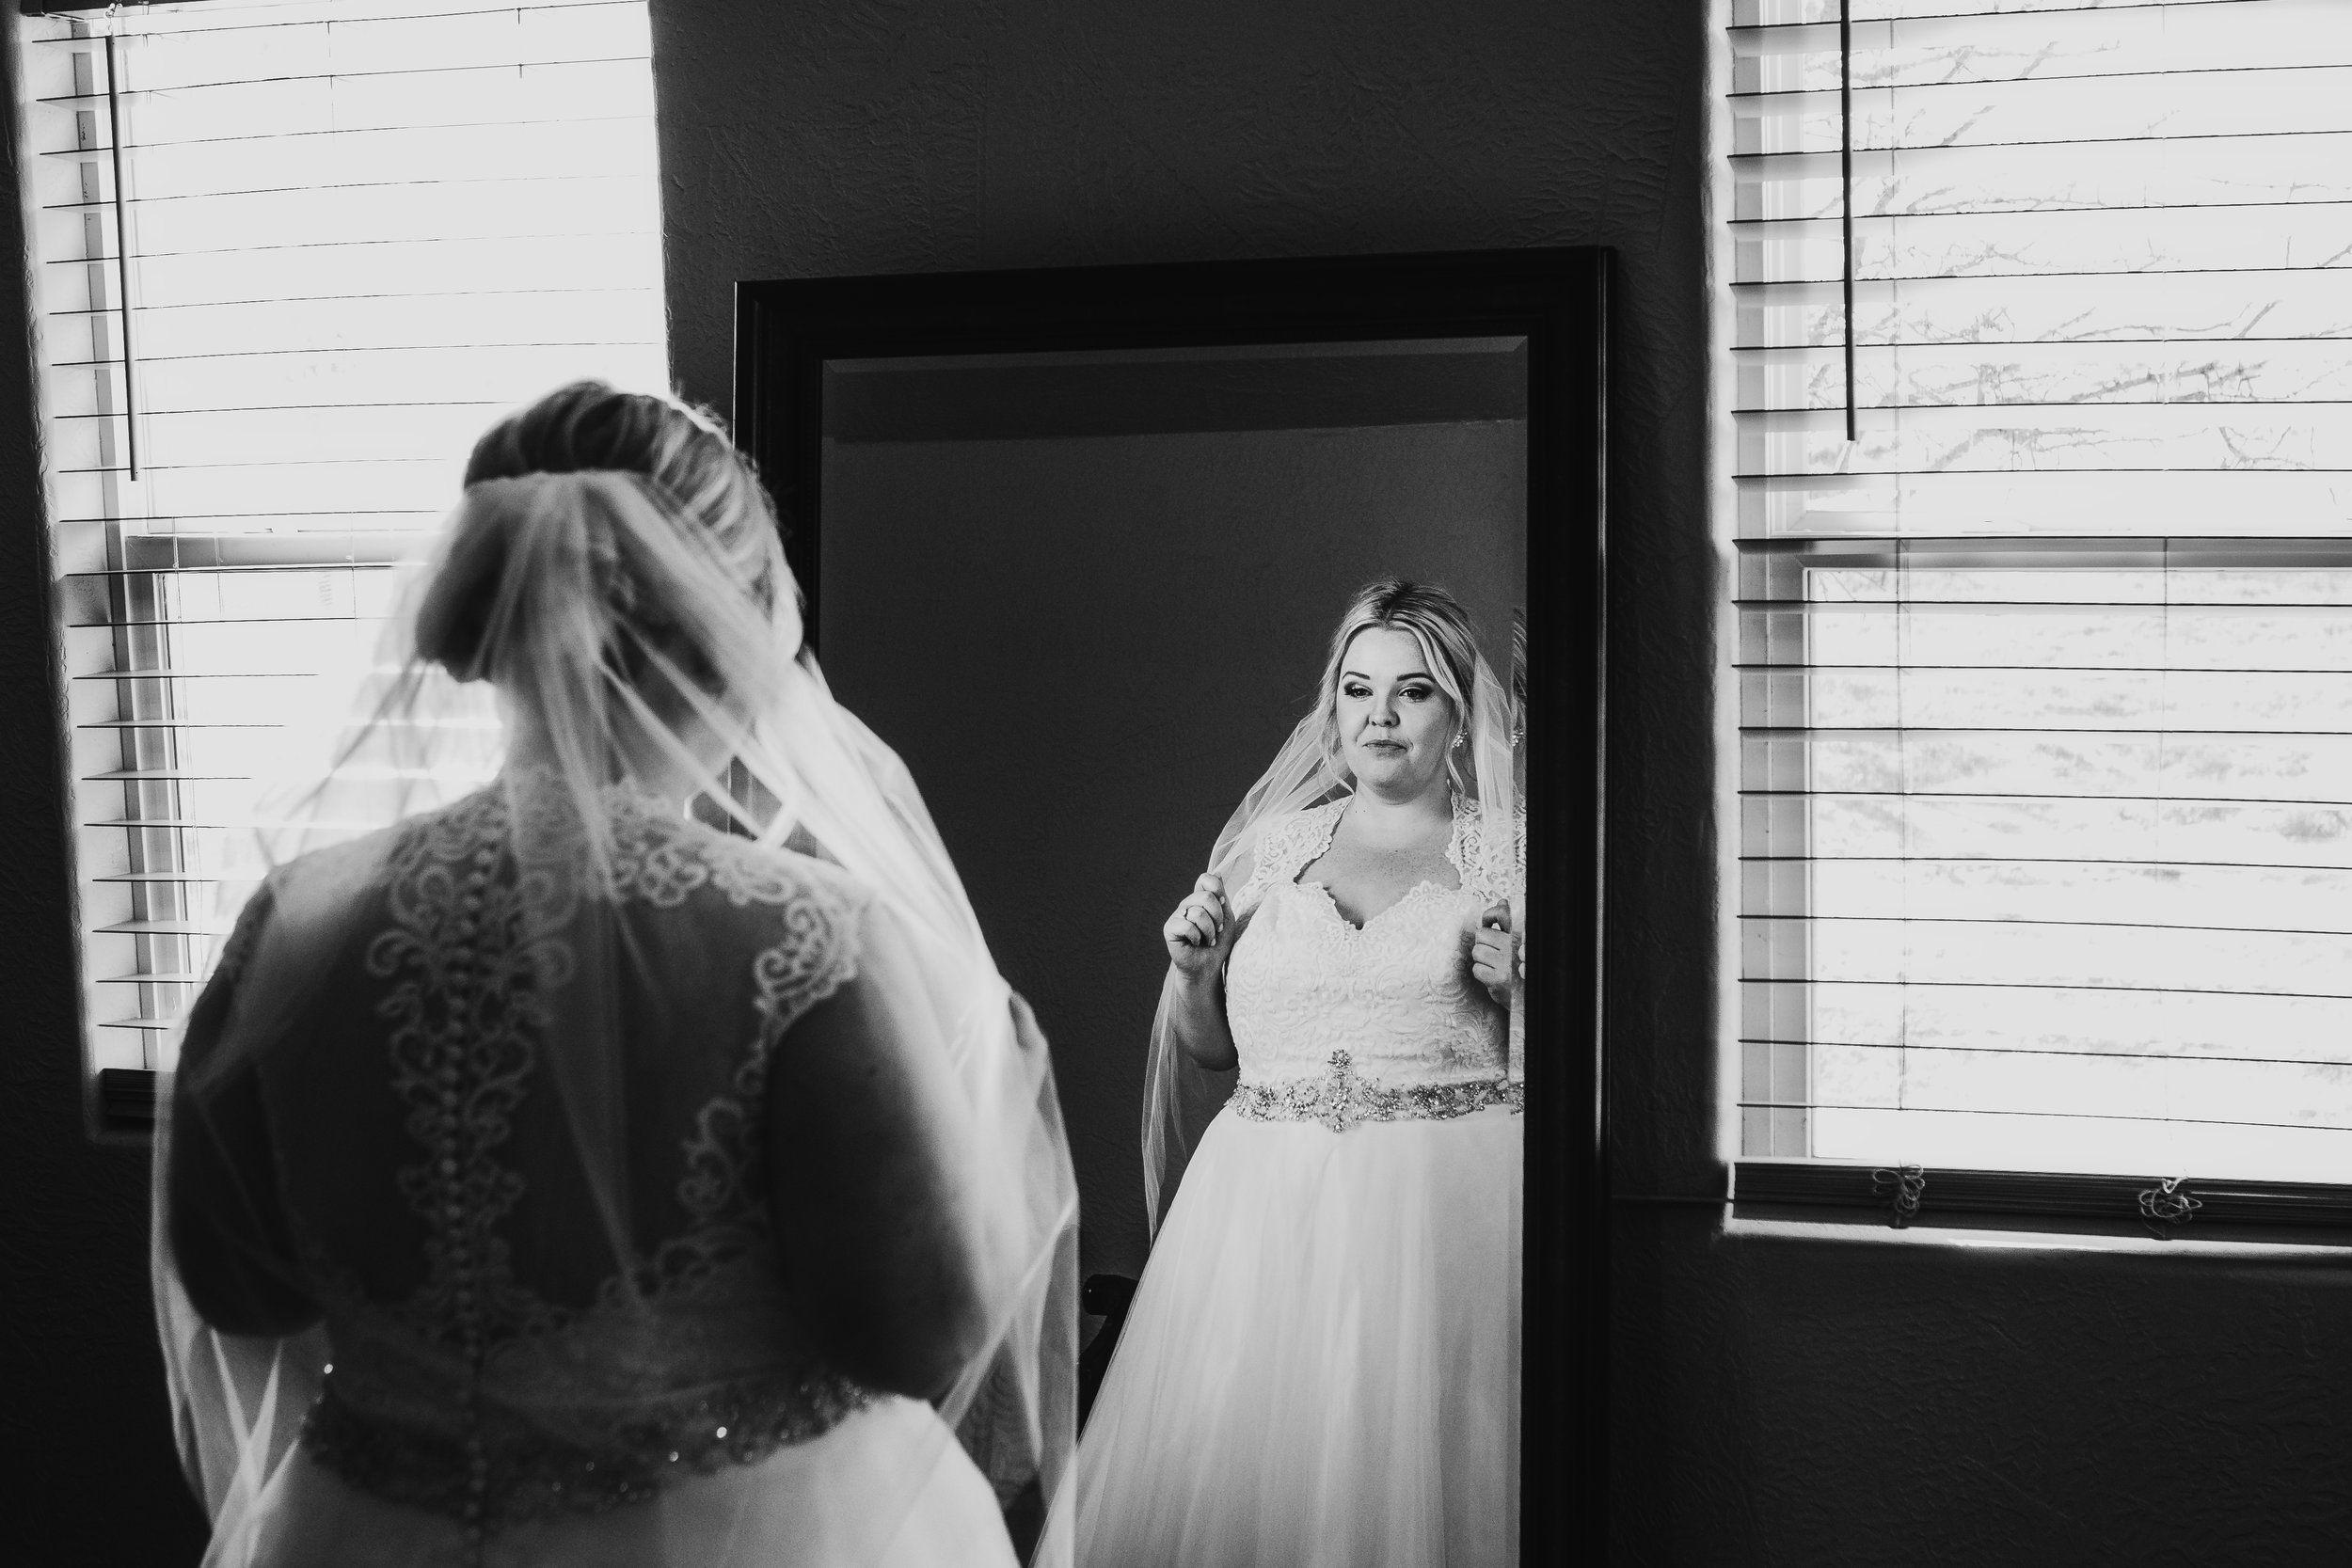  Mirror photo of the bride showing all the detail in her dress, veil and accessories #tealawardphotography #texasweddings #amarillophotographer #amarilloweddingphotographer #emotionalphotography #intimateweddingphotography #weddingday #weddingphotos #texasphotographer #inspiredwedding #intimatewedding #weddingformals #bigday #portraits 